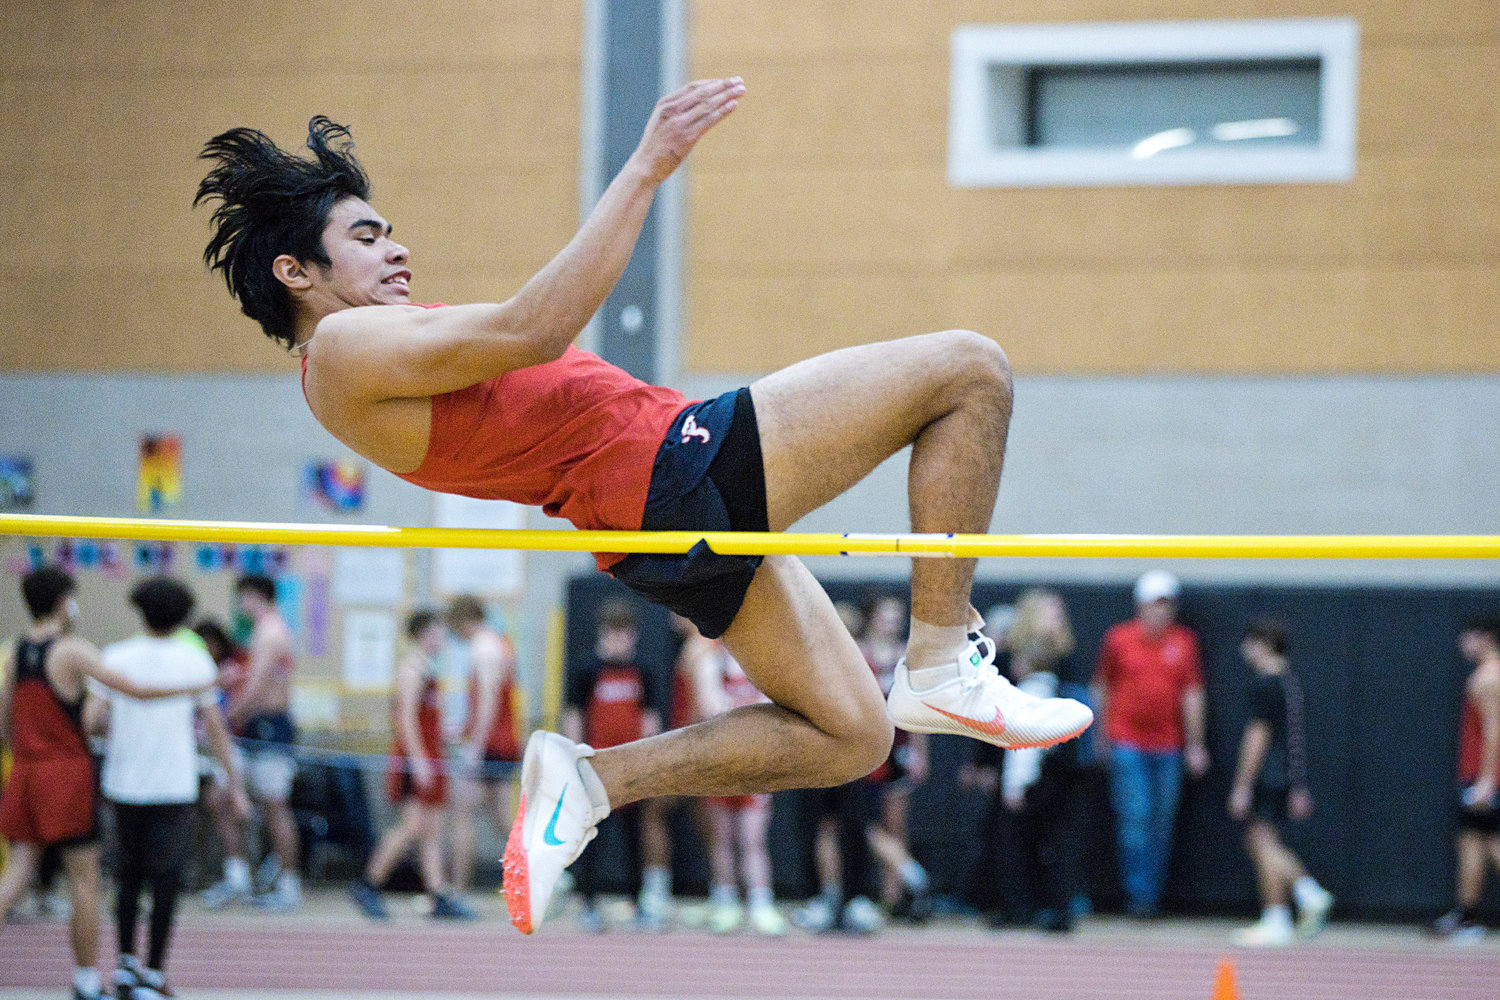 Tristan Thomas competes in the high jump during Friday’s meet.